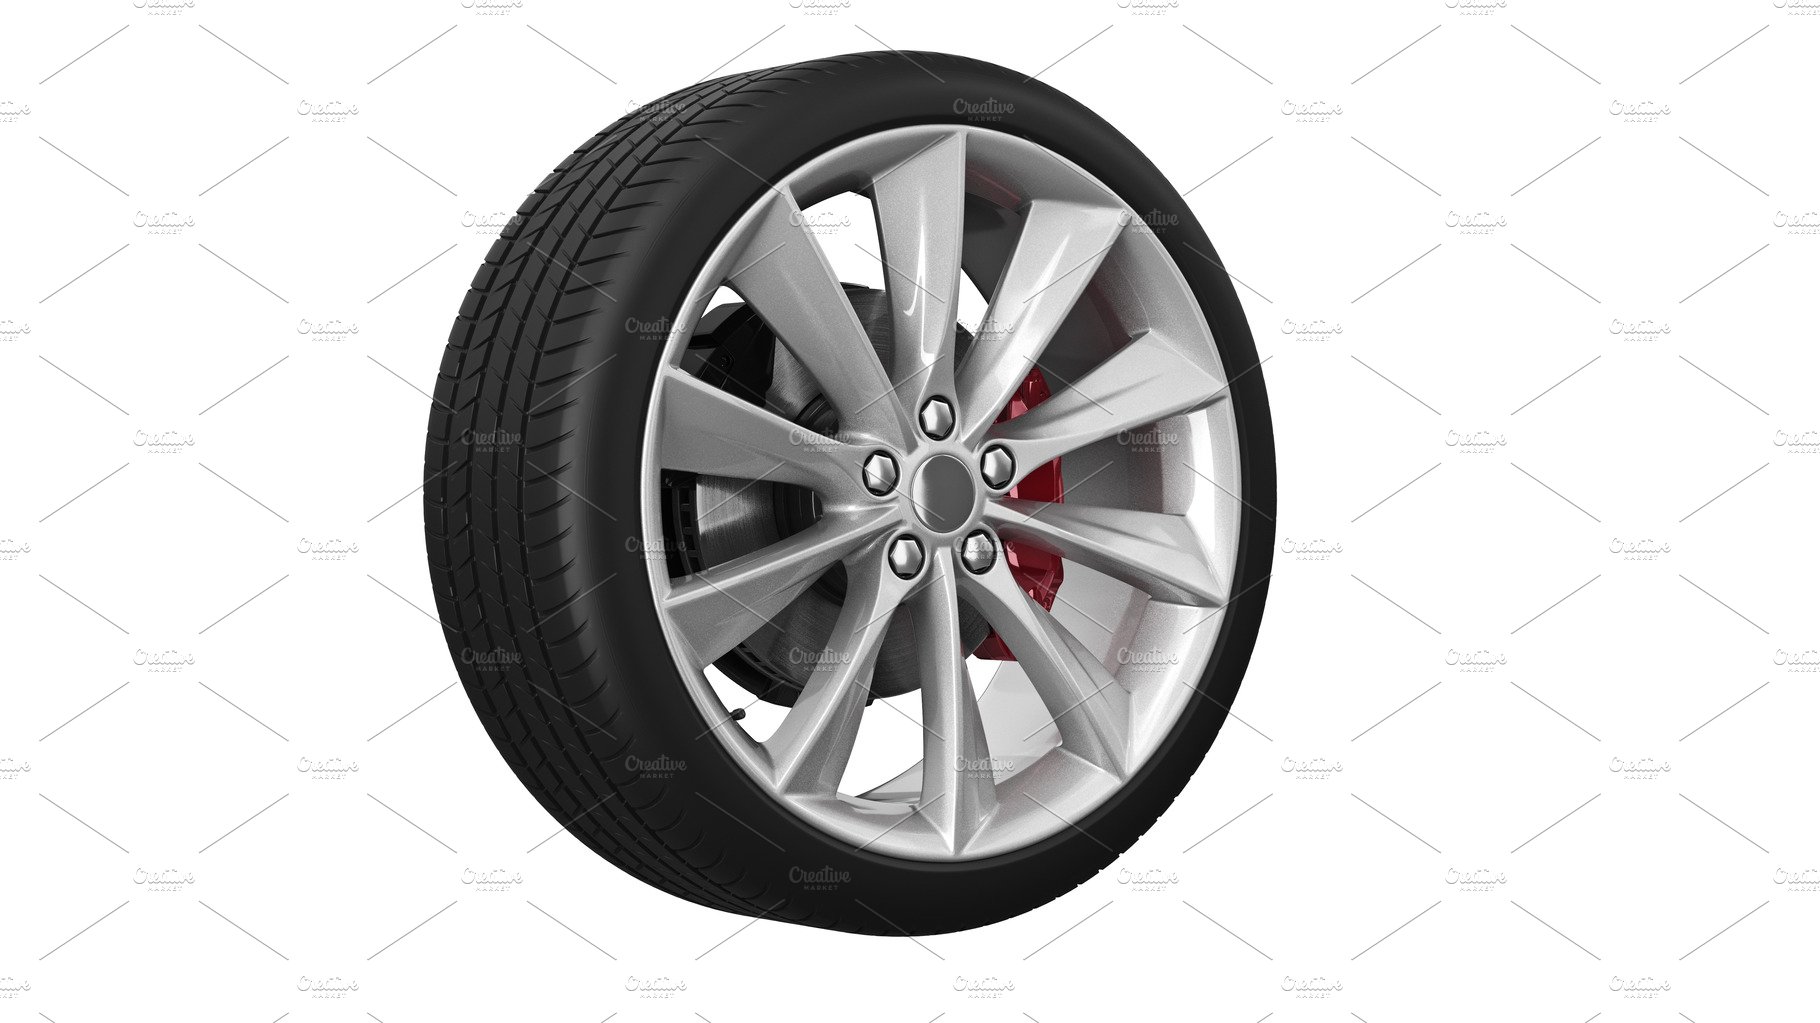 Car wheel protector cover image.